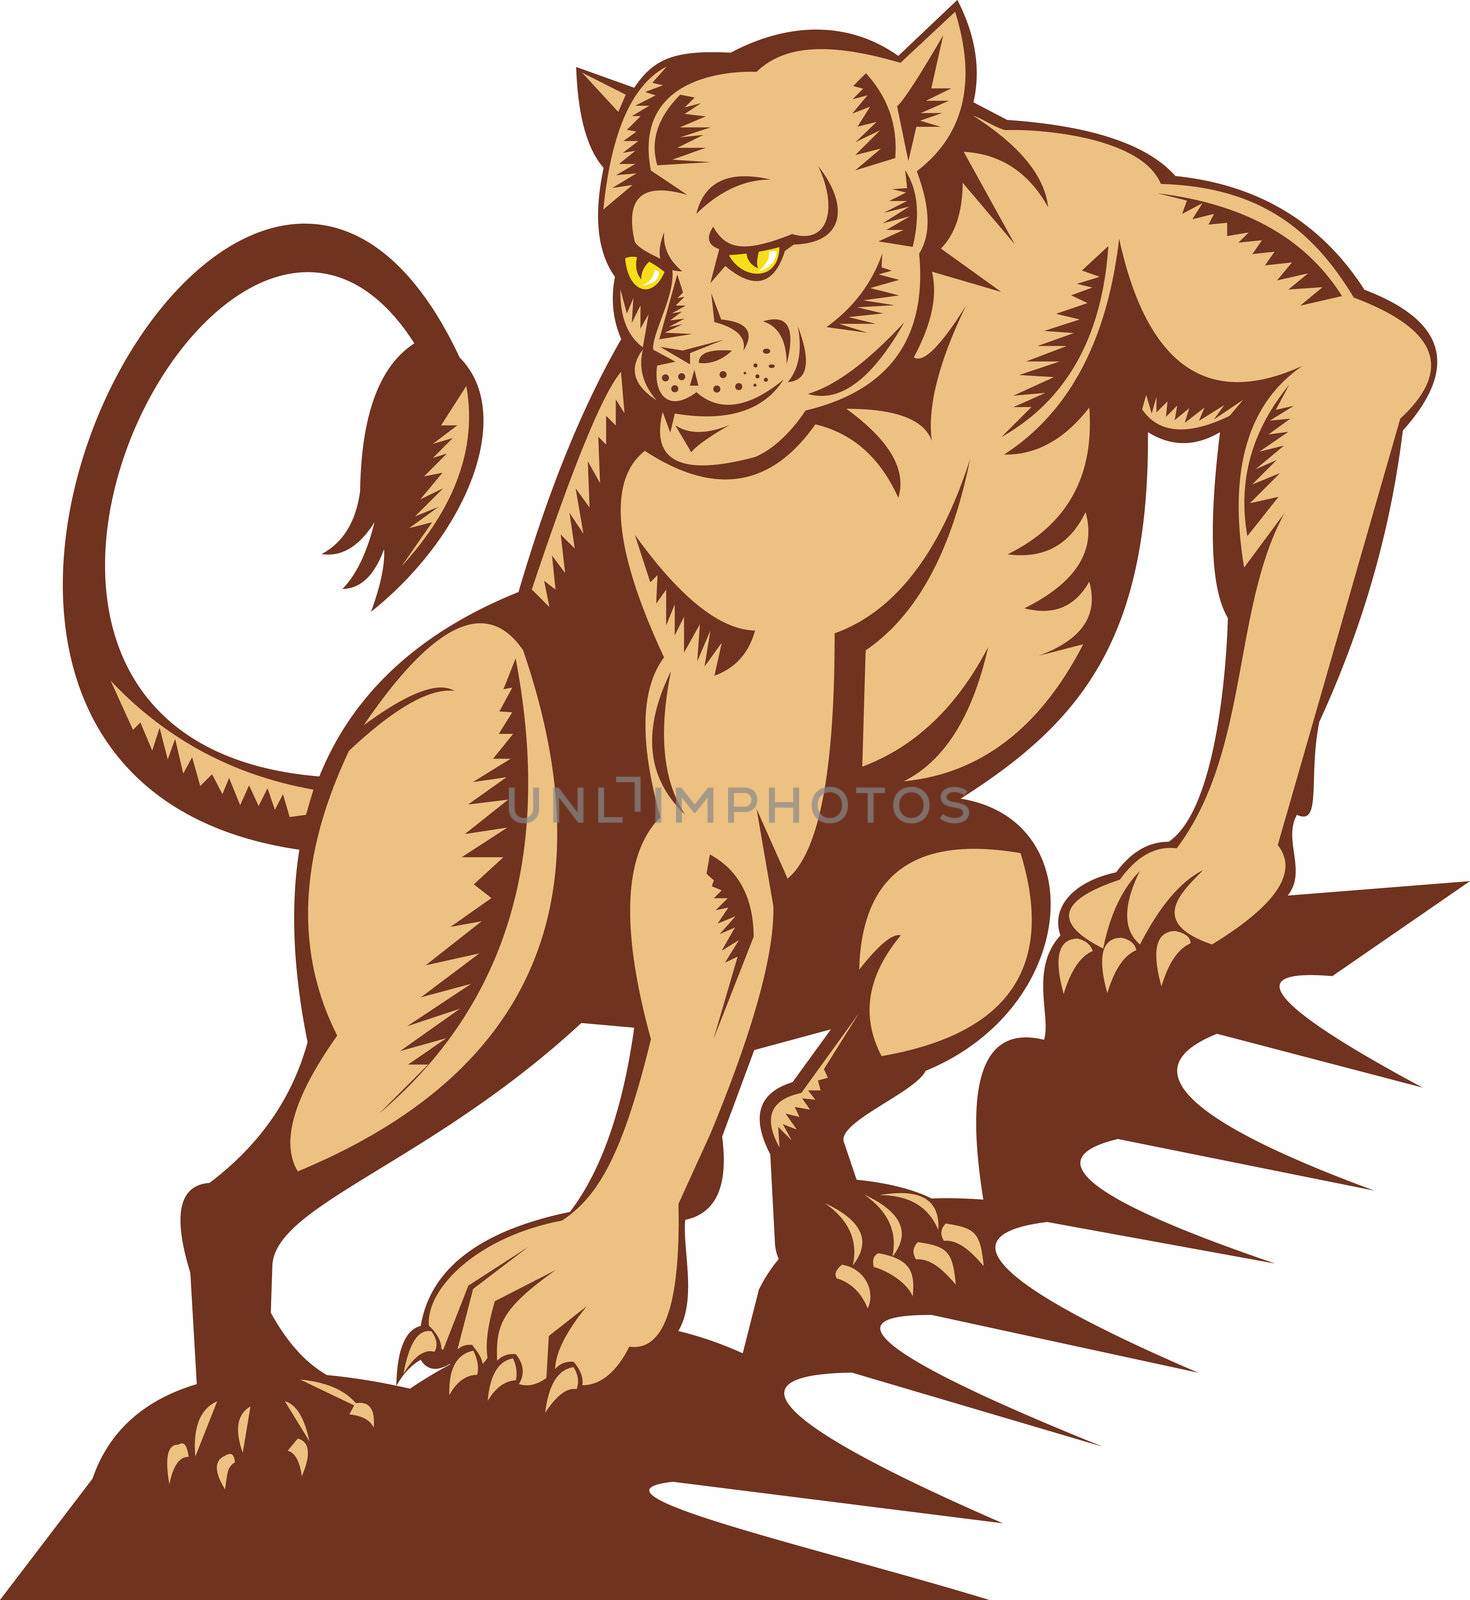 illustration of a lioness on the prowl done in woodcut style